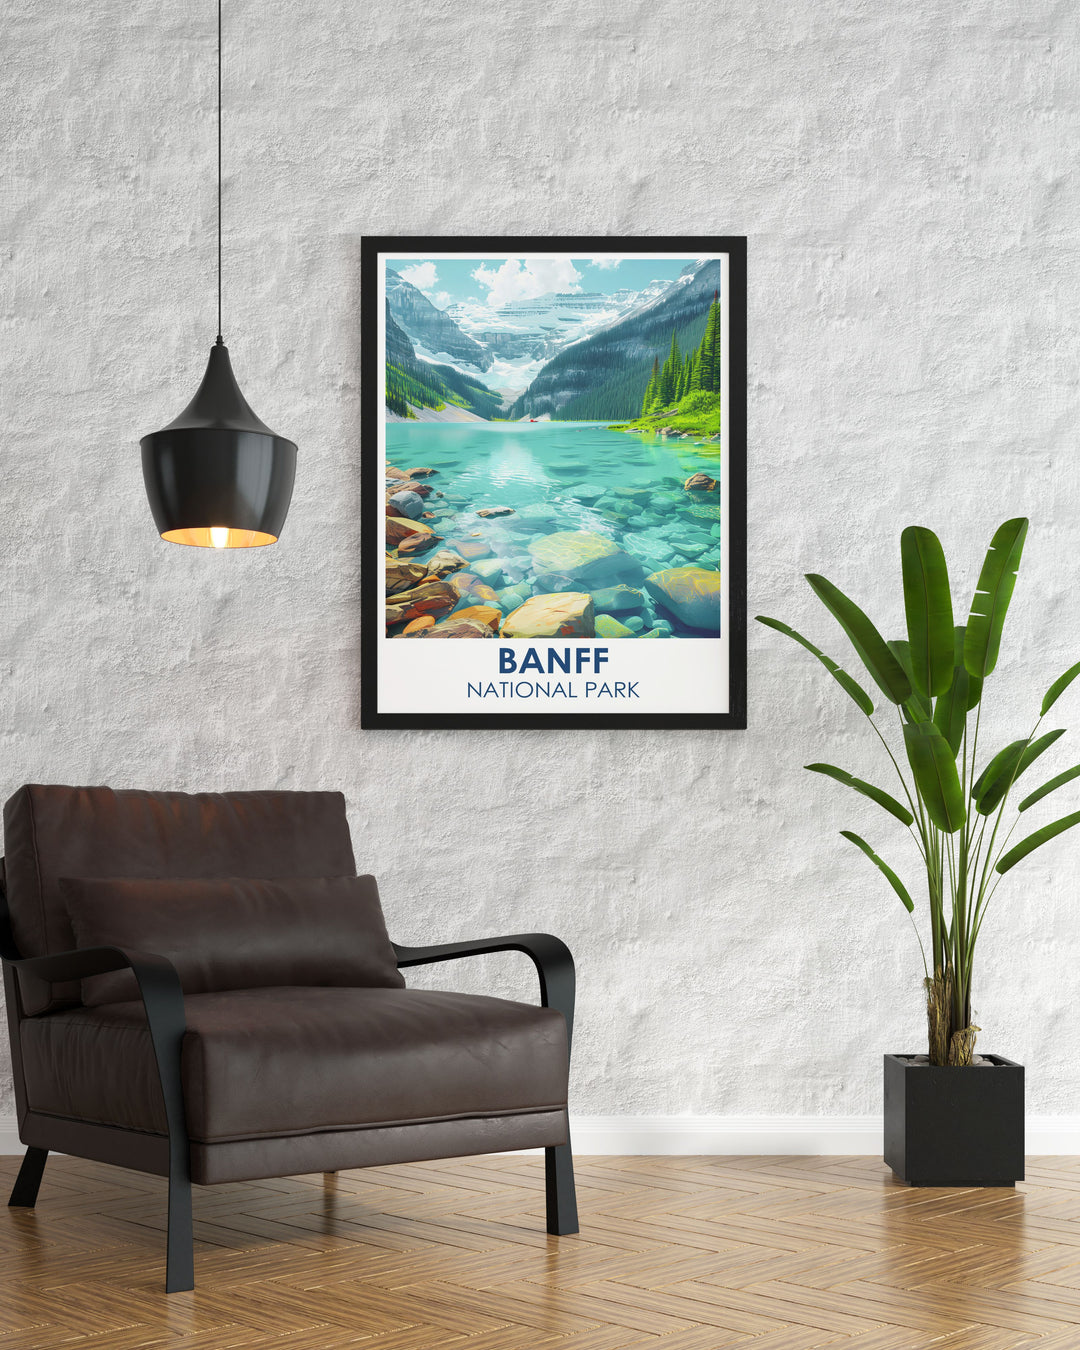 Lake Louise travel poster capturing the reflective beauty of the lake with its scenic mountain backdrop, offering a peaceful addition to any rooms decor.